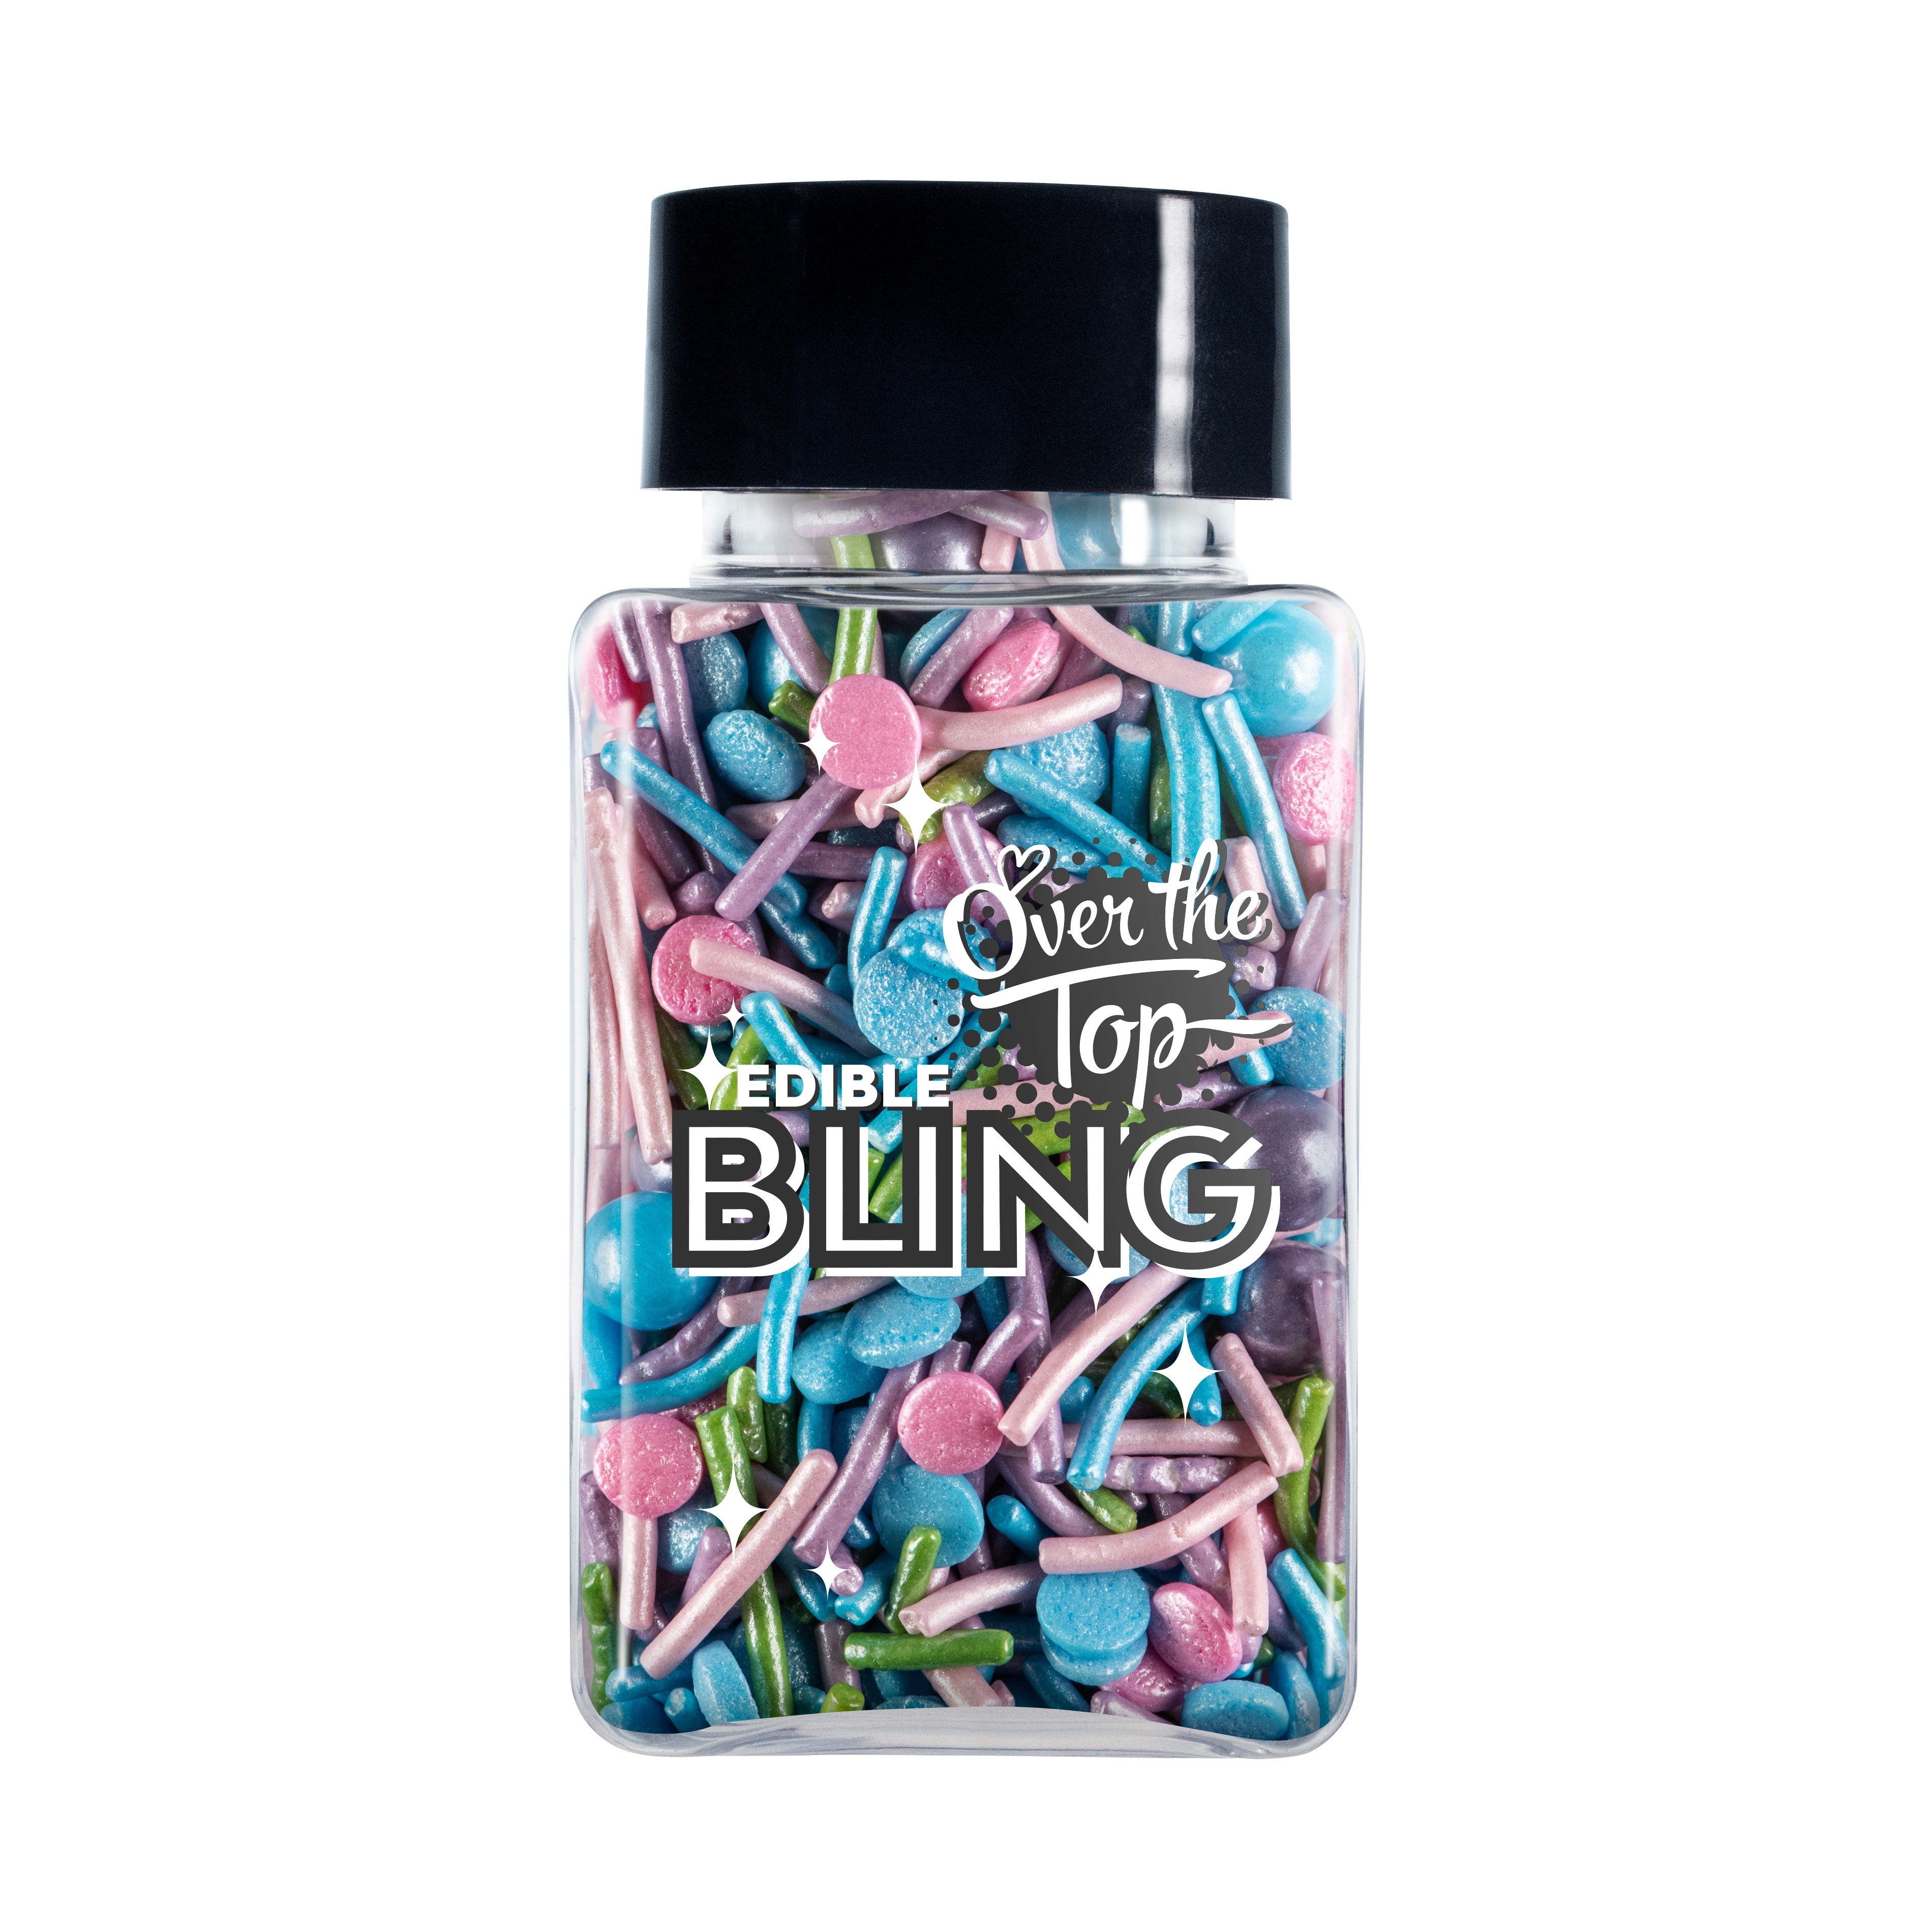 Over The Top Edible Bling Sprinkles - Mermaid Mix 60g